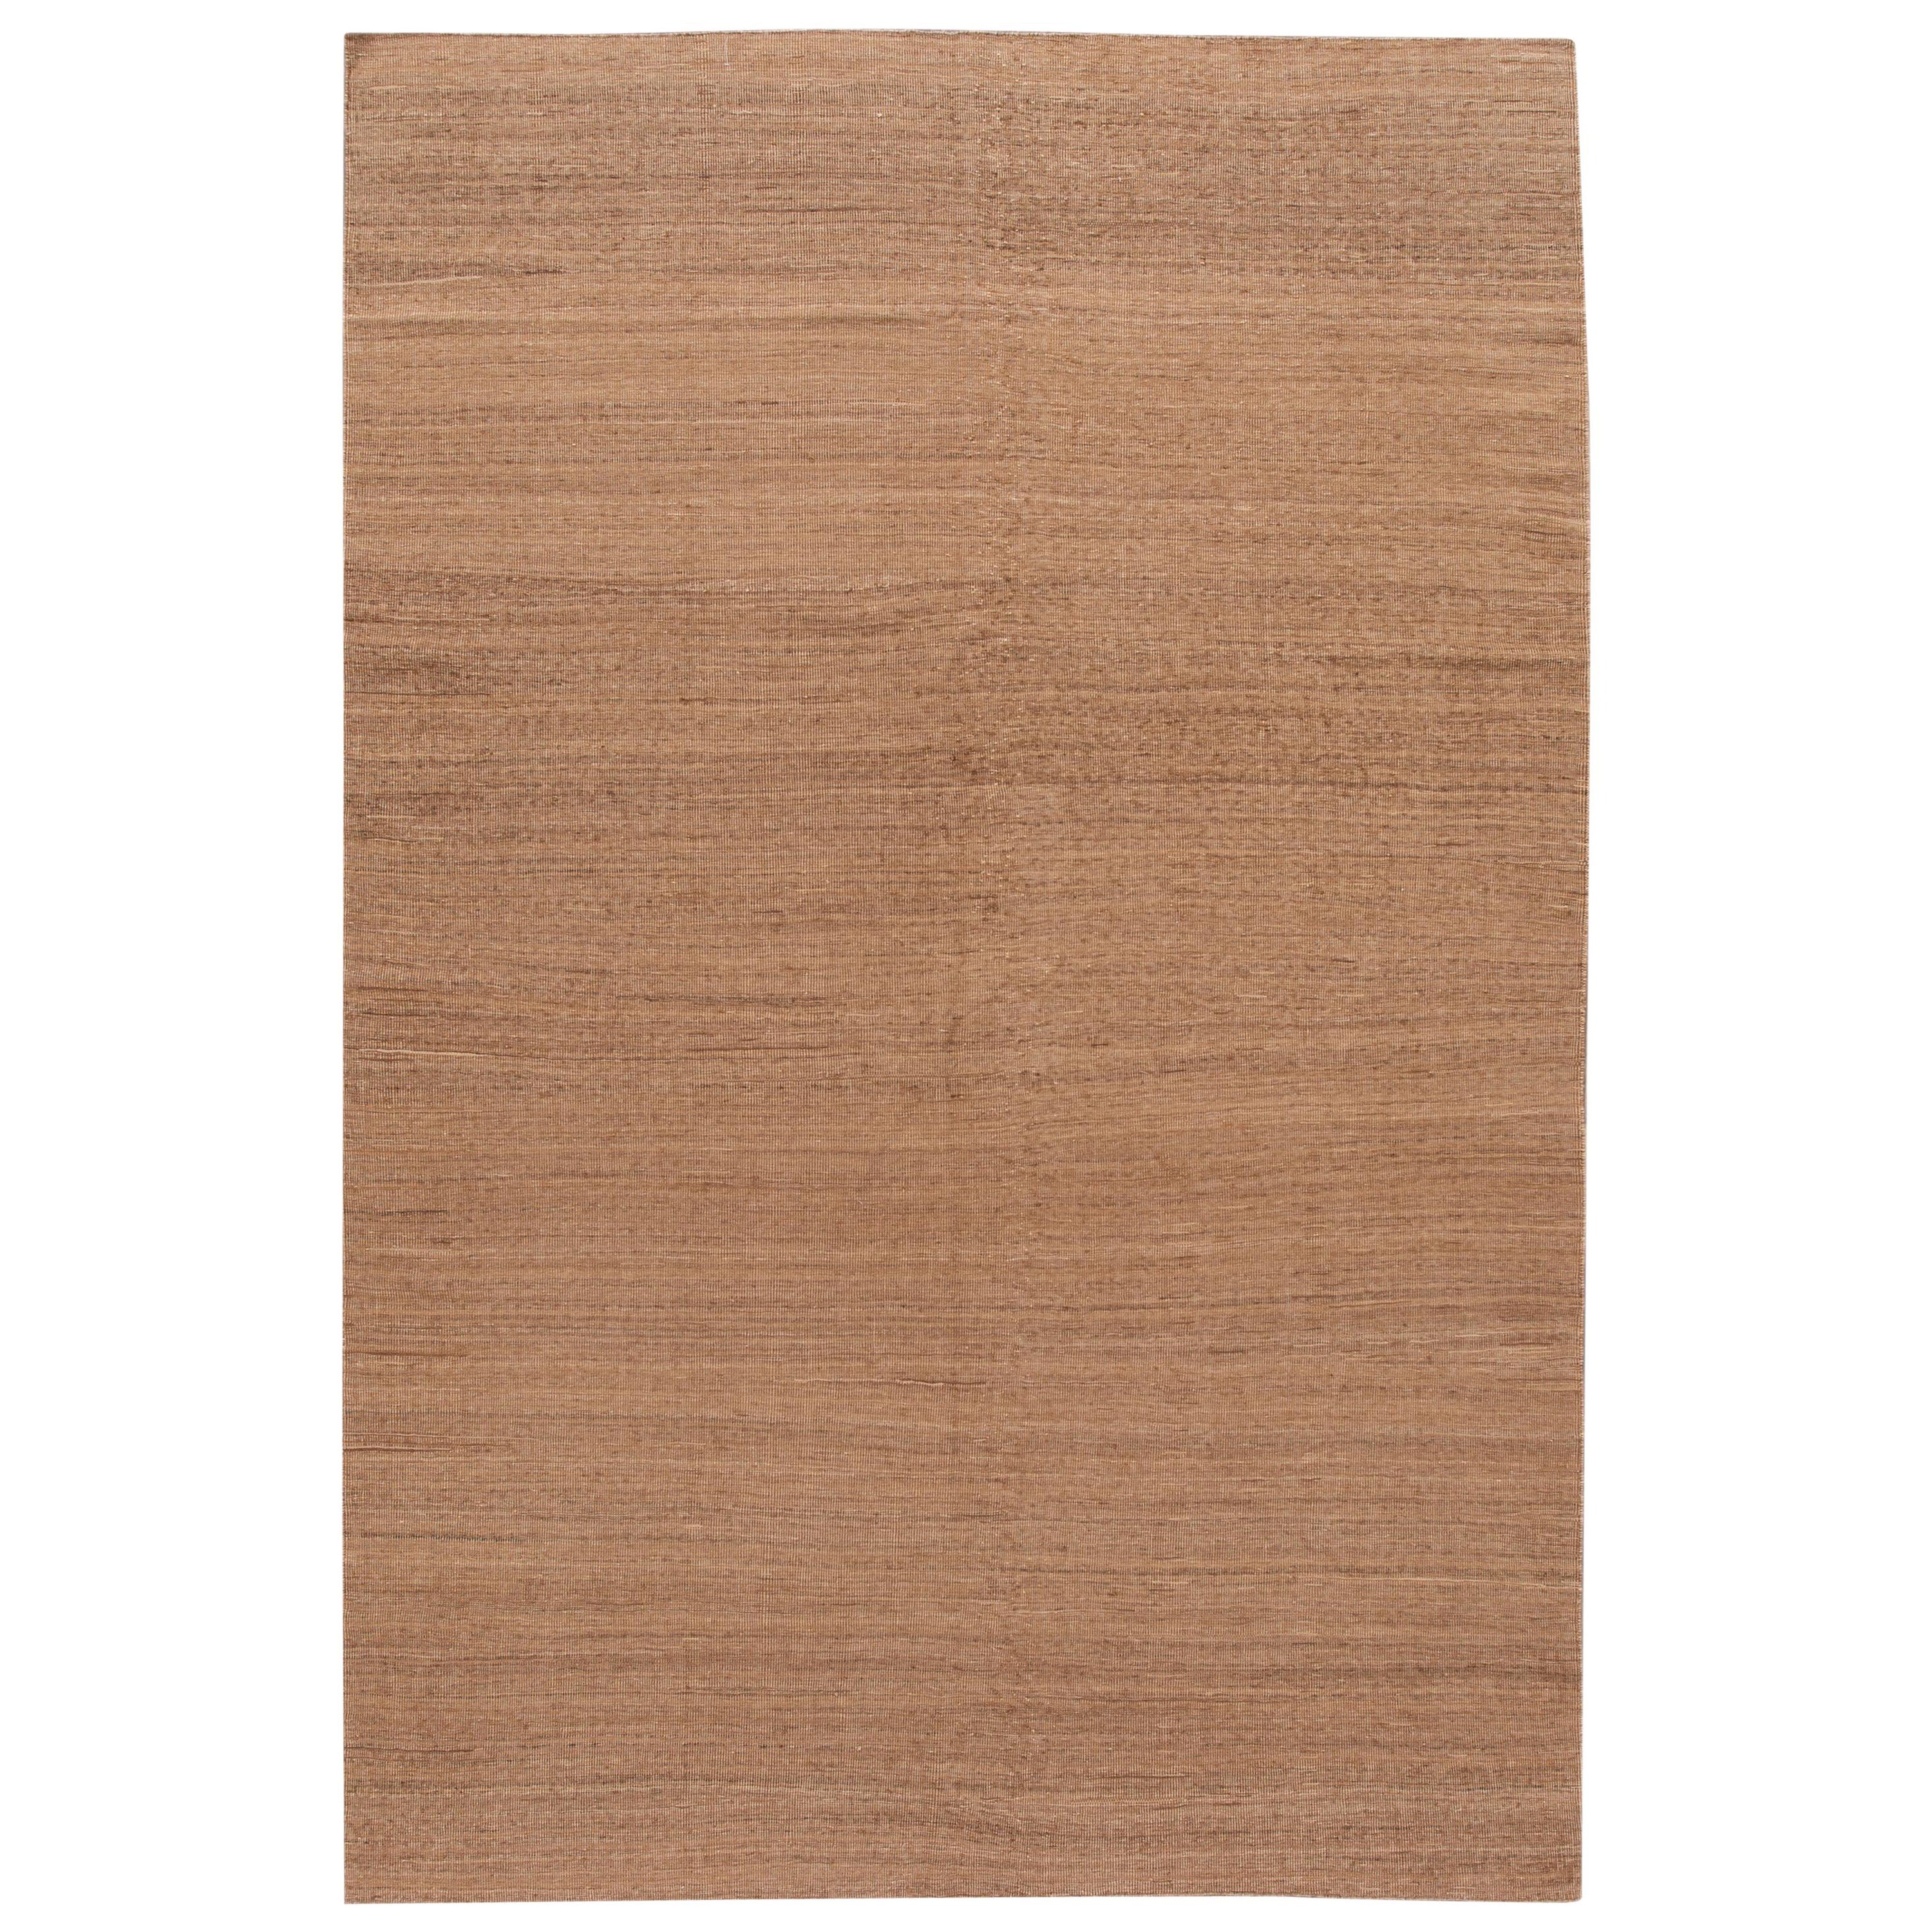 Solid Brown Contemporary Kilim Flatweave Wool Rug For Sale